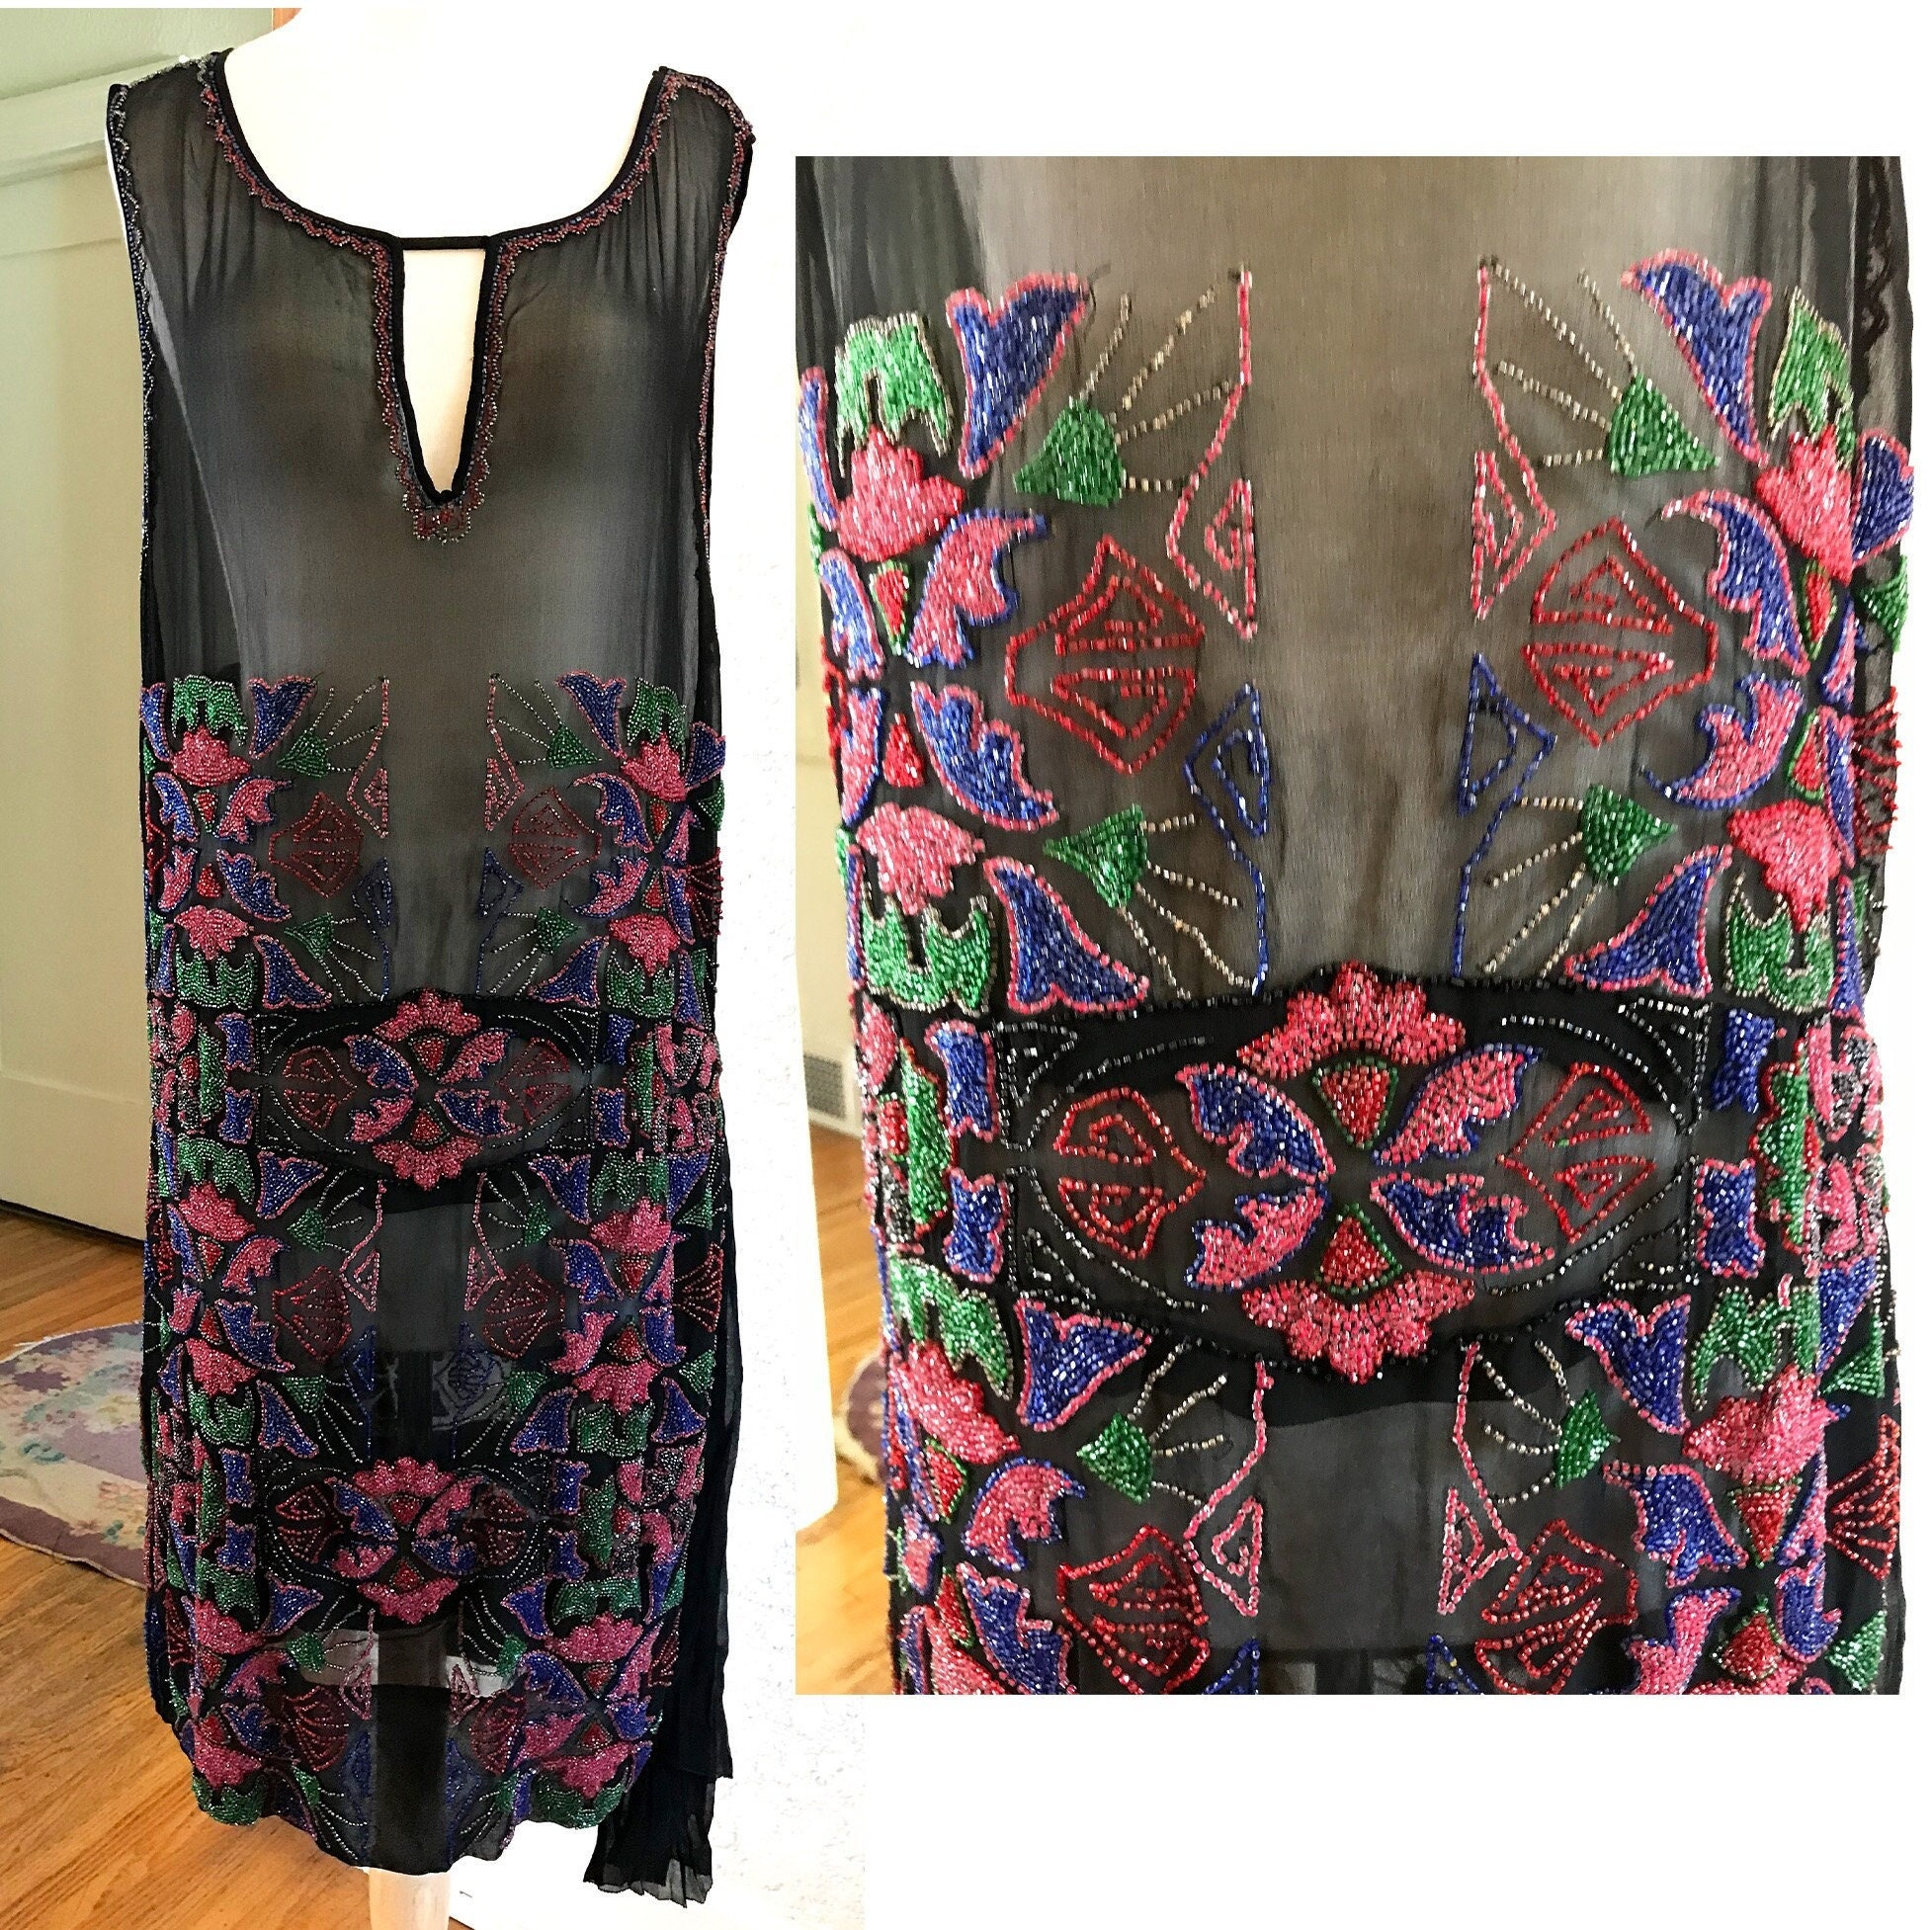 Real Vintage Search Engine Exquisite Vintage 1920s Flapper Beaded Dress in Amazing Condition Great Gatsby Roaring 20s Art Deco Fashion Size SmallMedium $1,298.00 AT vintagedancer.com